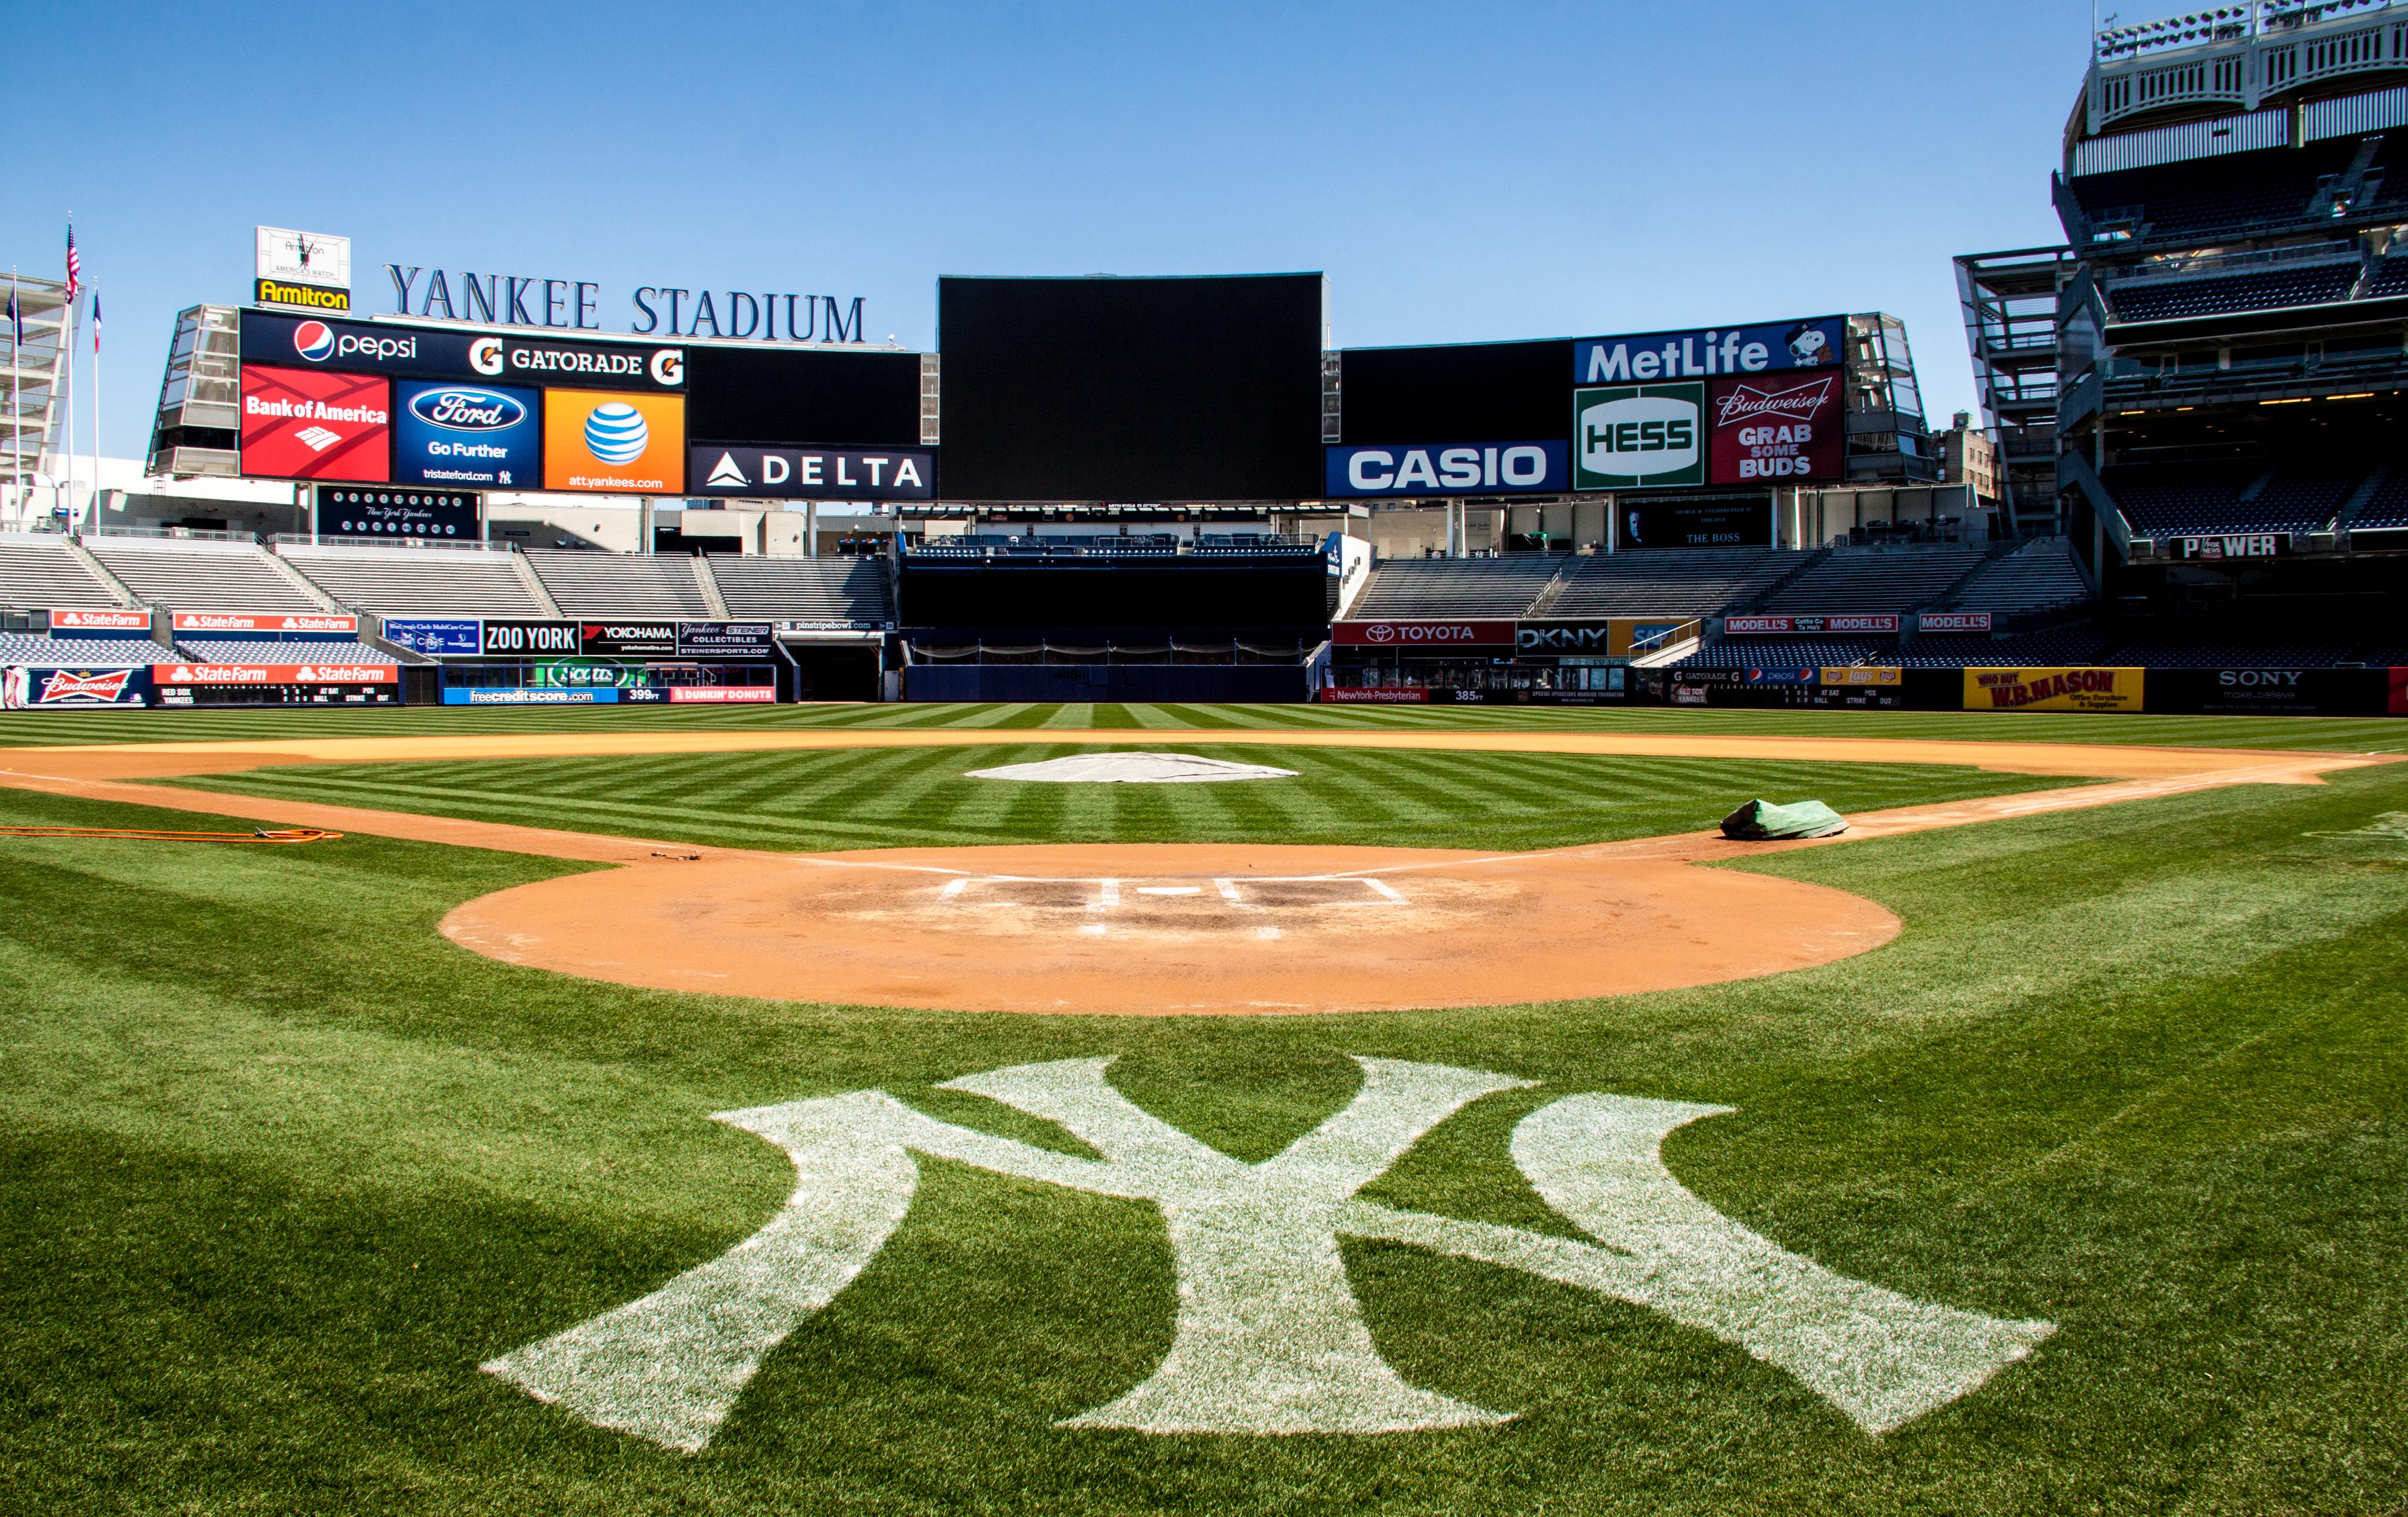 New Jersey For A Private Lunch On The Malibu Deck Of Yankee Stadium